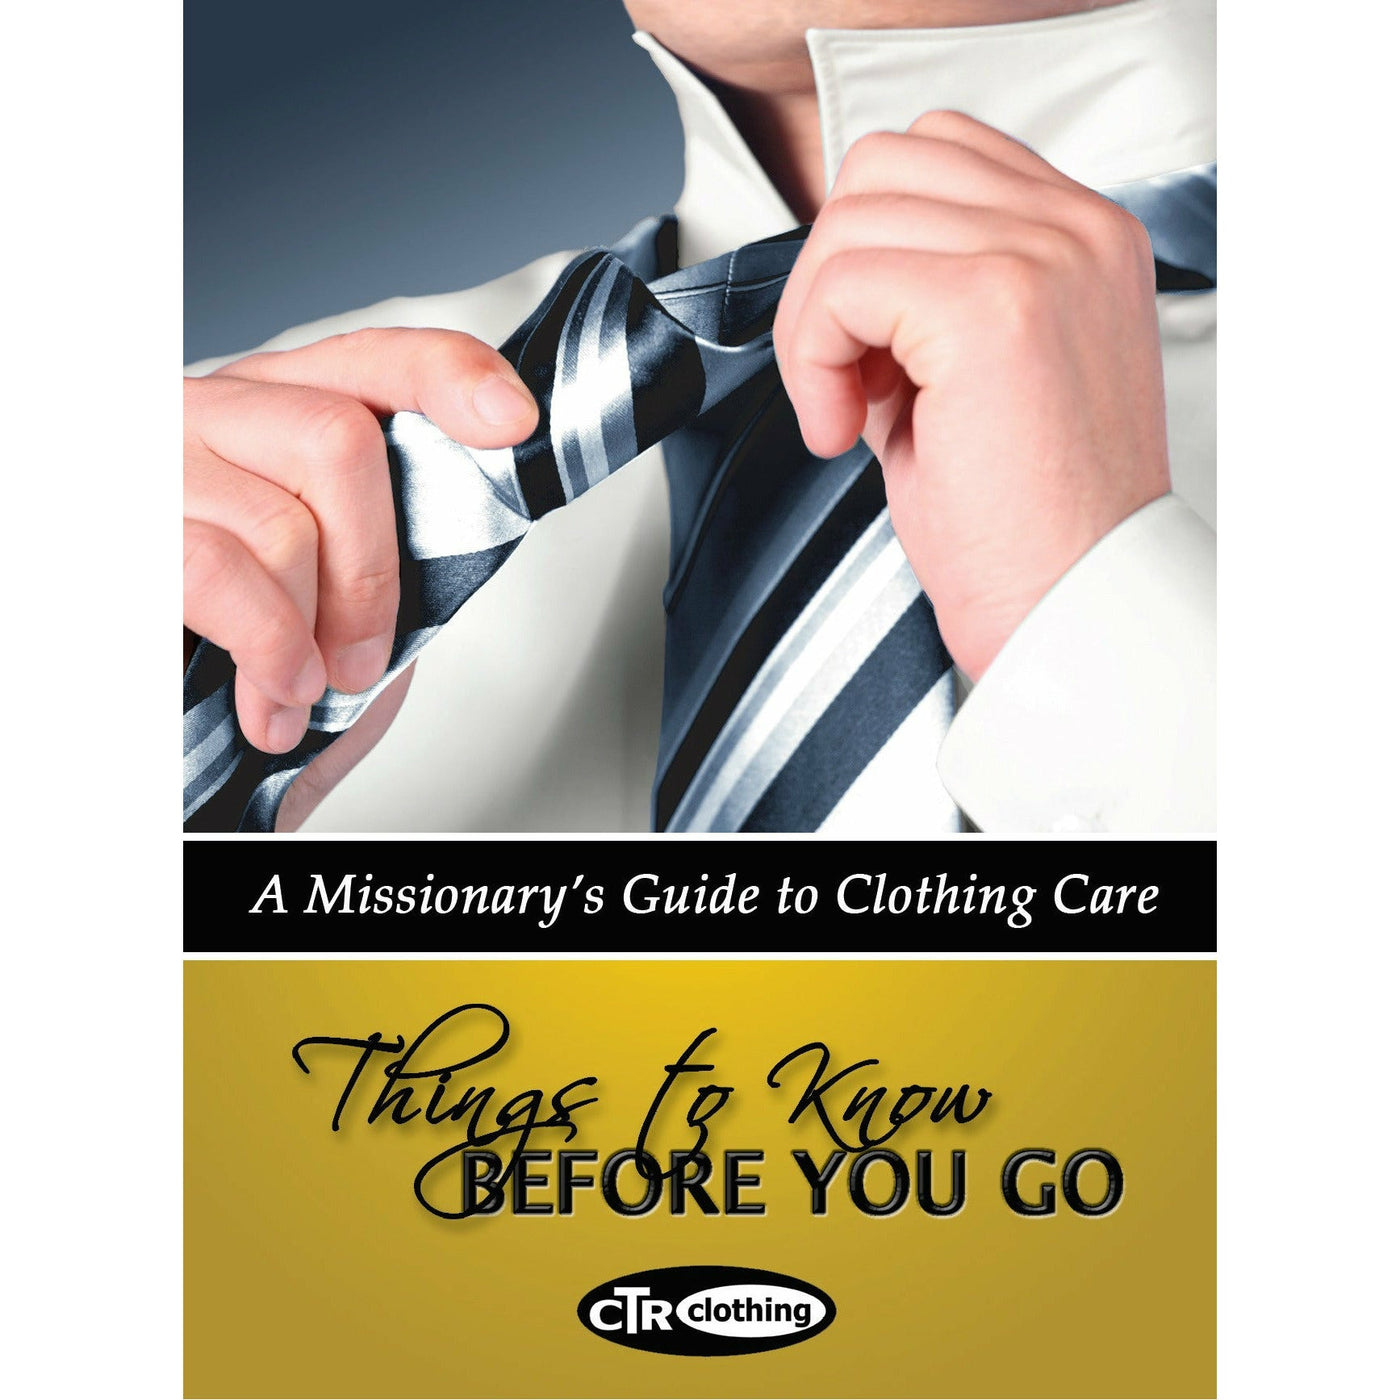 Cover View of Our Missionary Outfit Care Guide